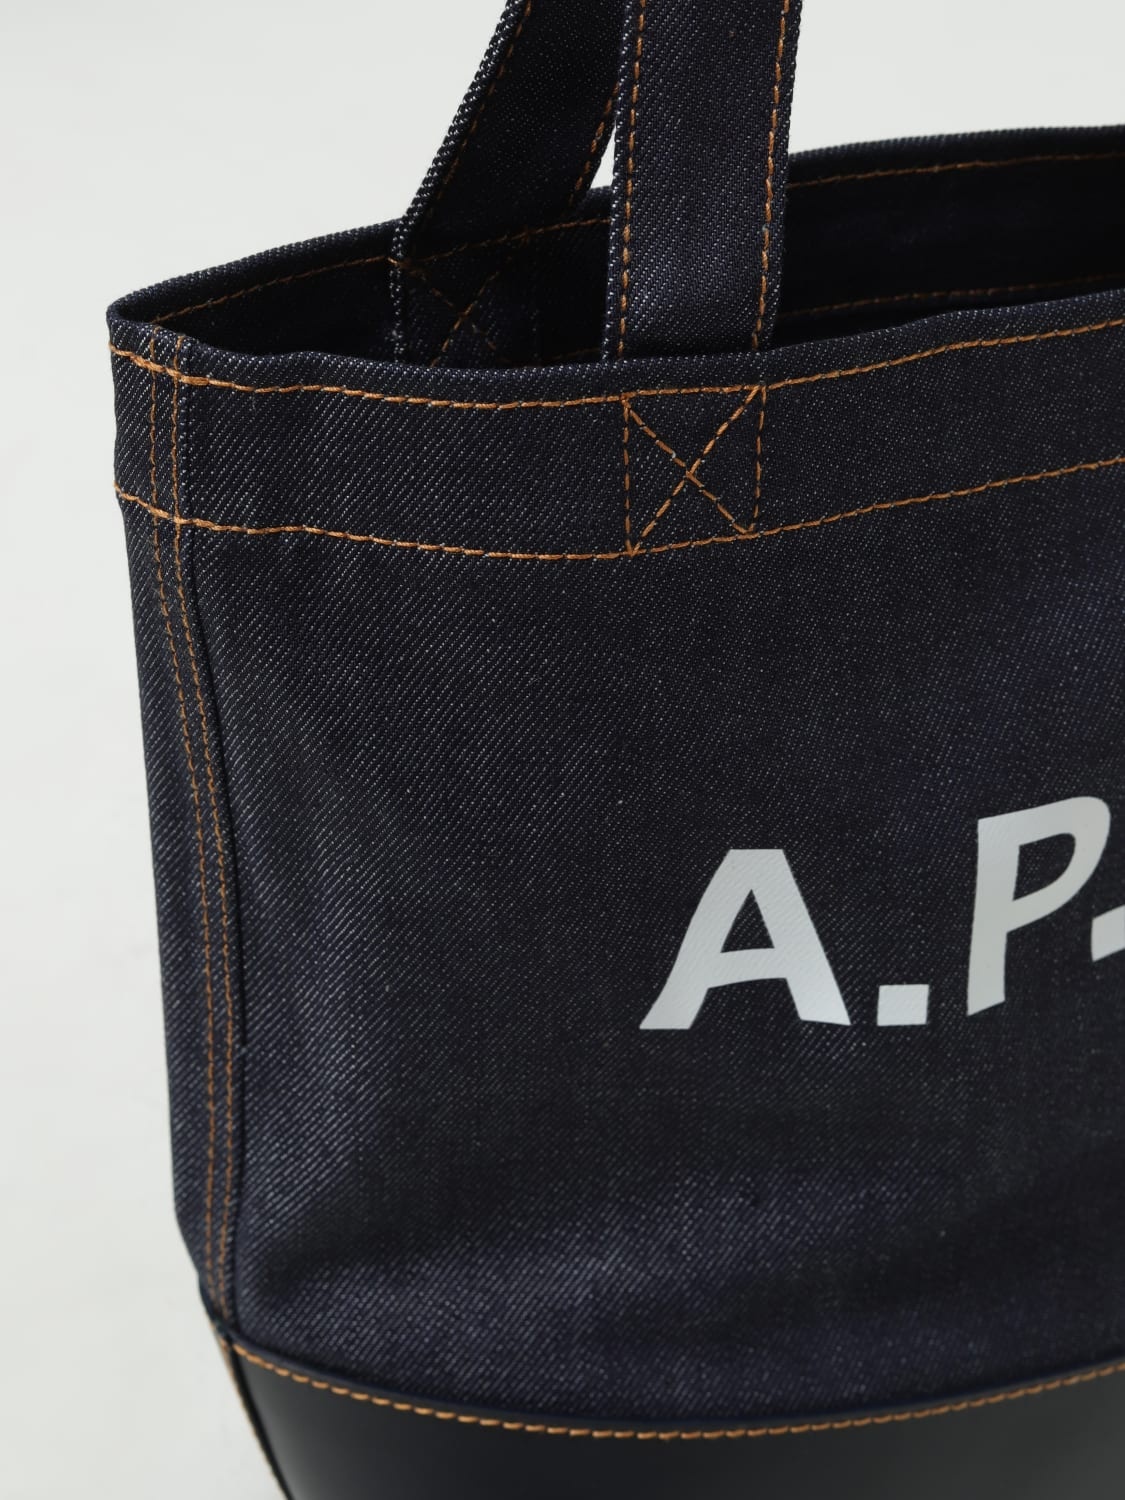 A.P.C. Axel bag in denim and synthetic leather - 3